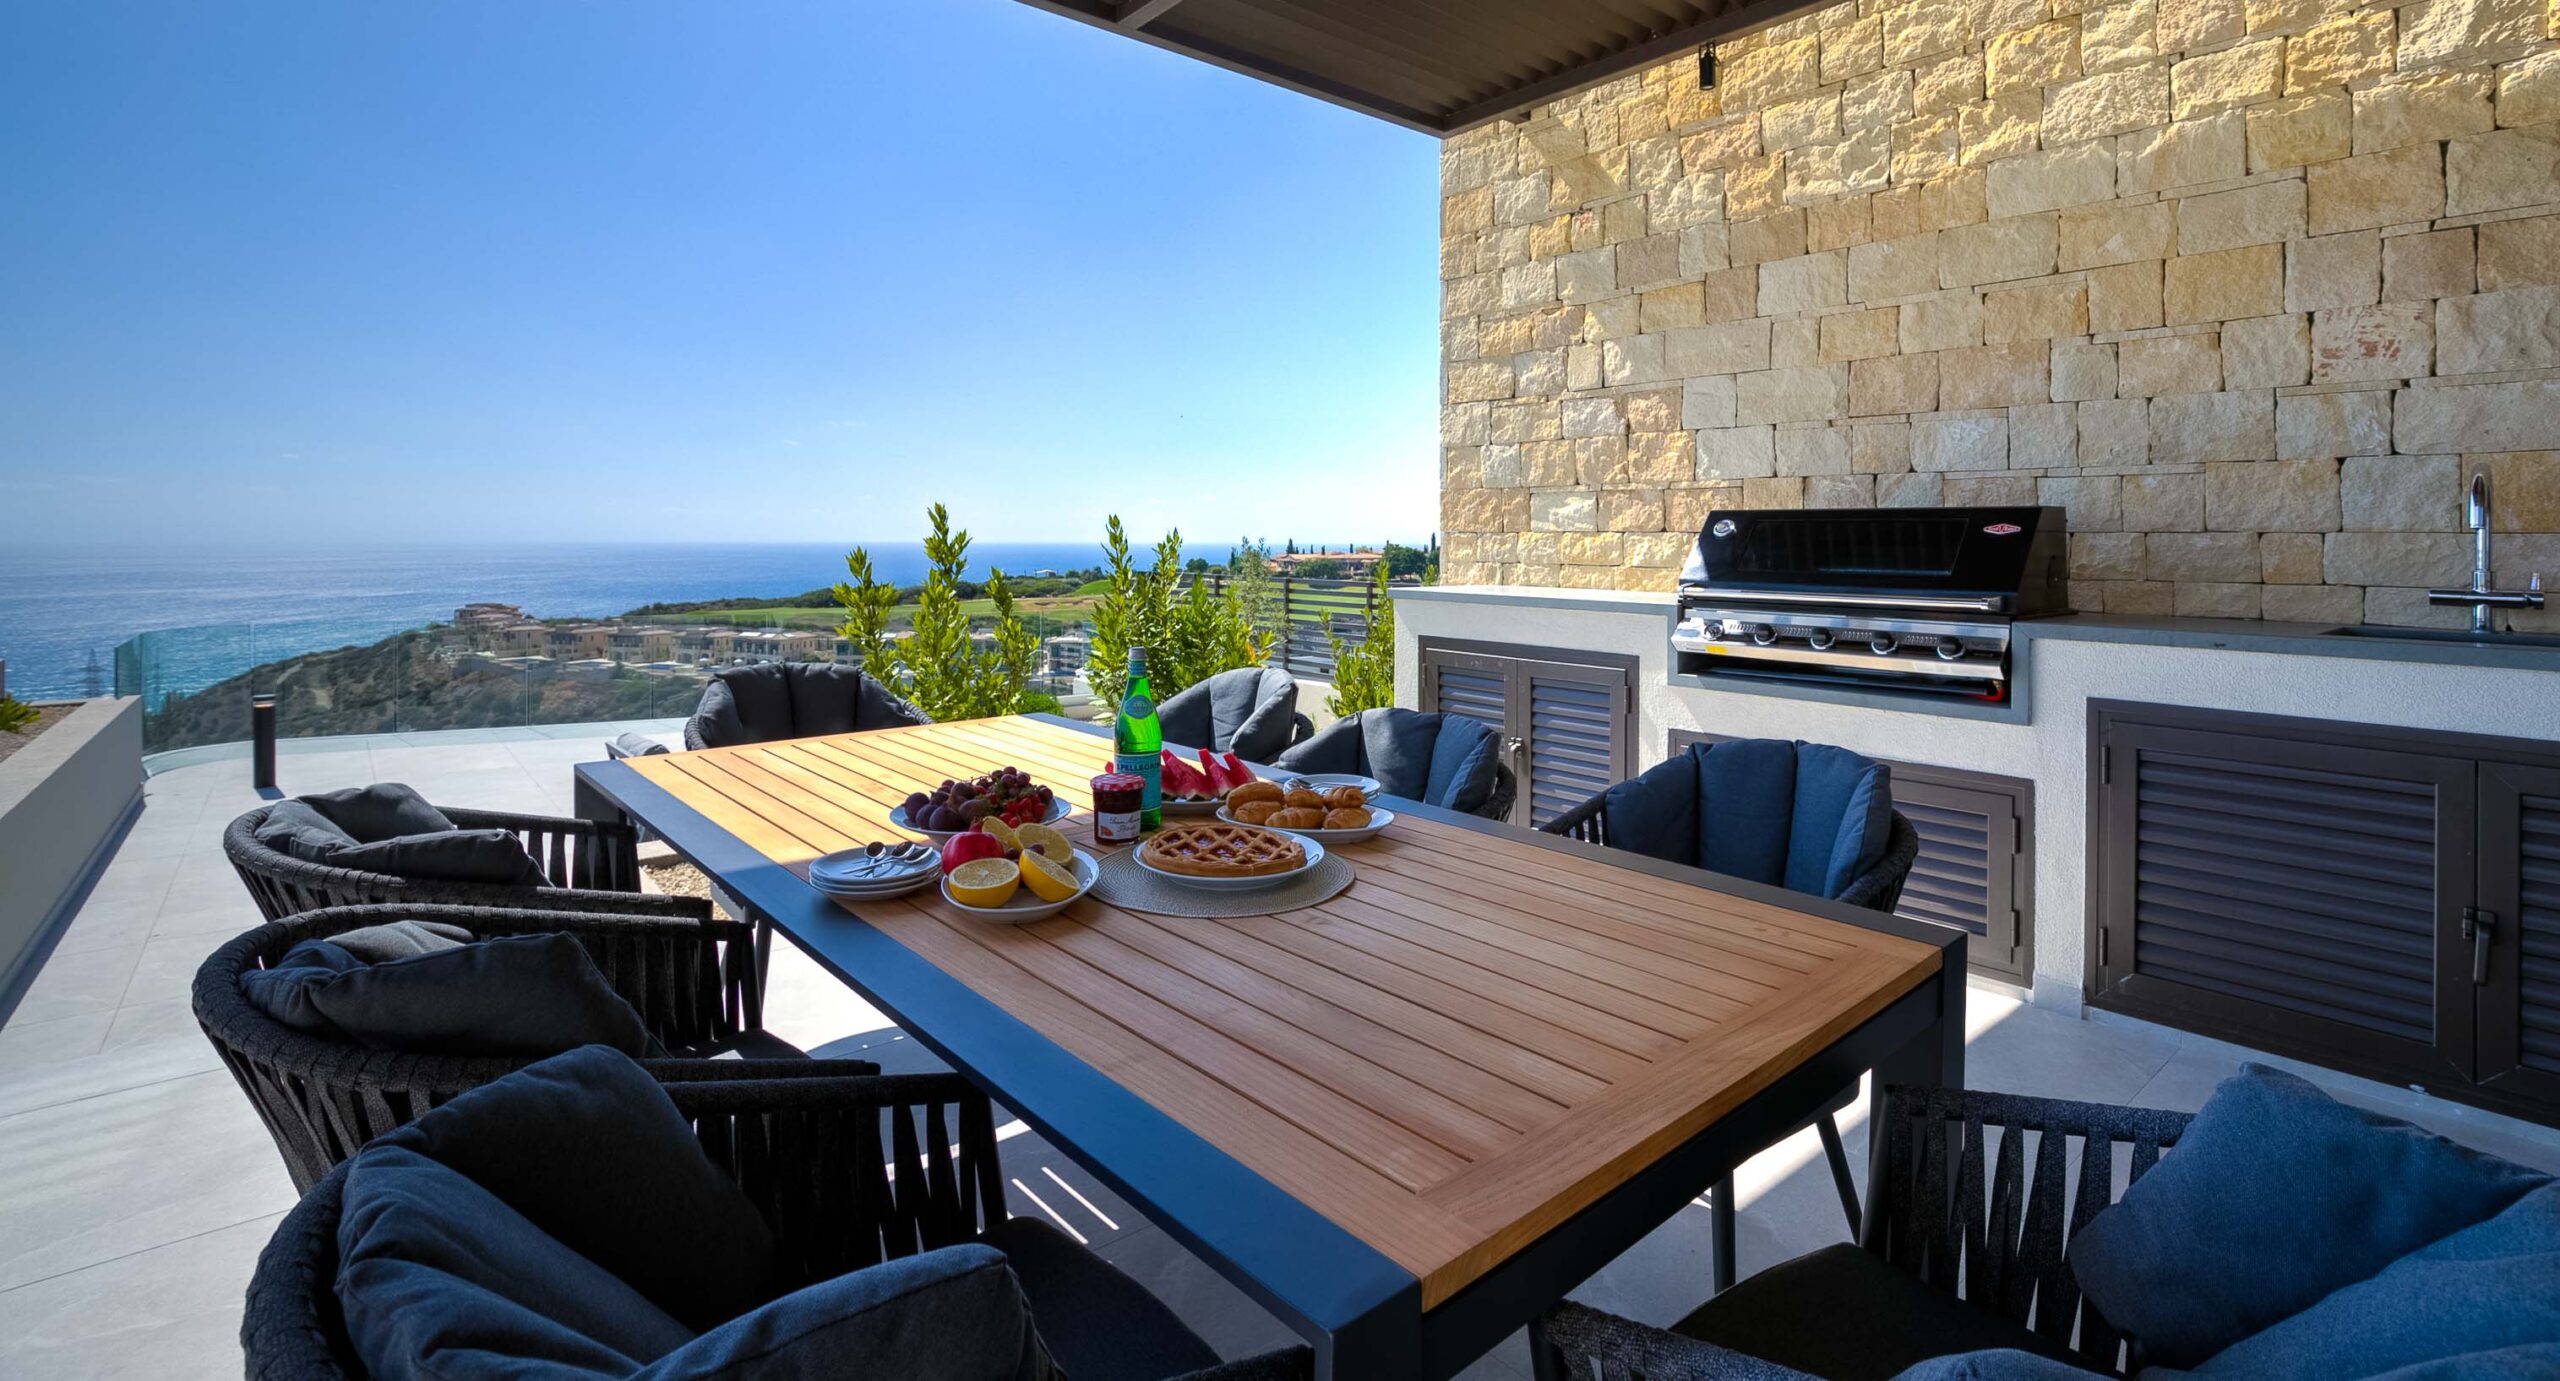 Photo of Villa 286 on Aphrodite Hills - outside terrace dining table (with breakfast set up), BBQ area and view to sea beyond.